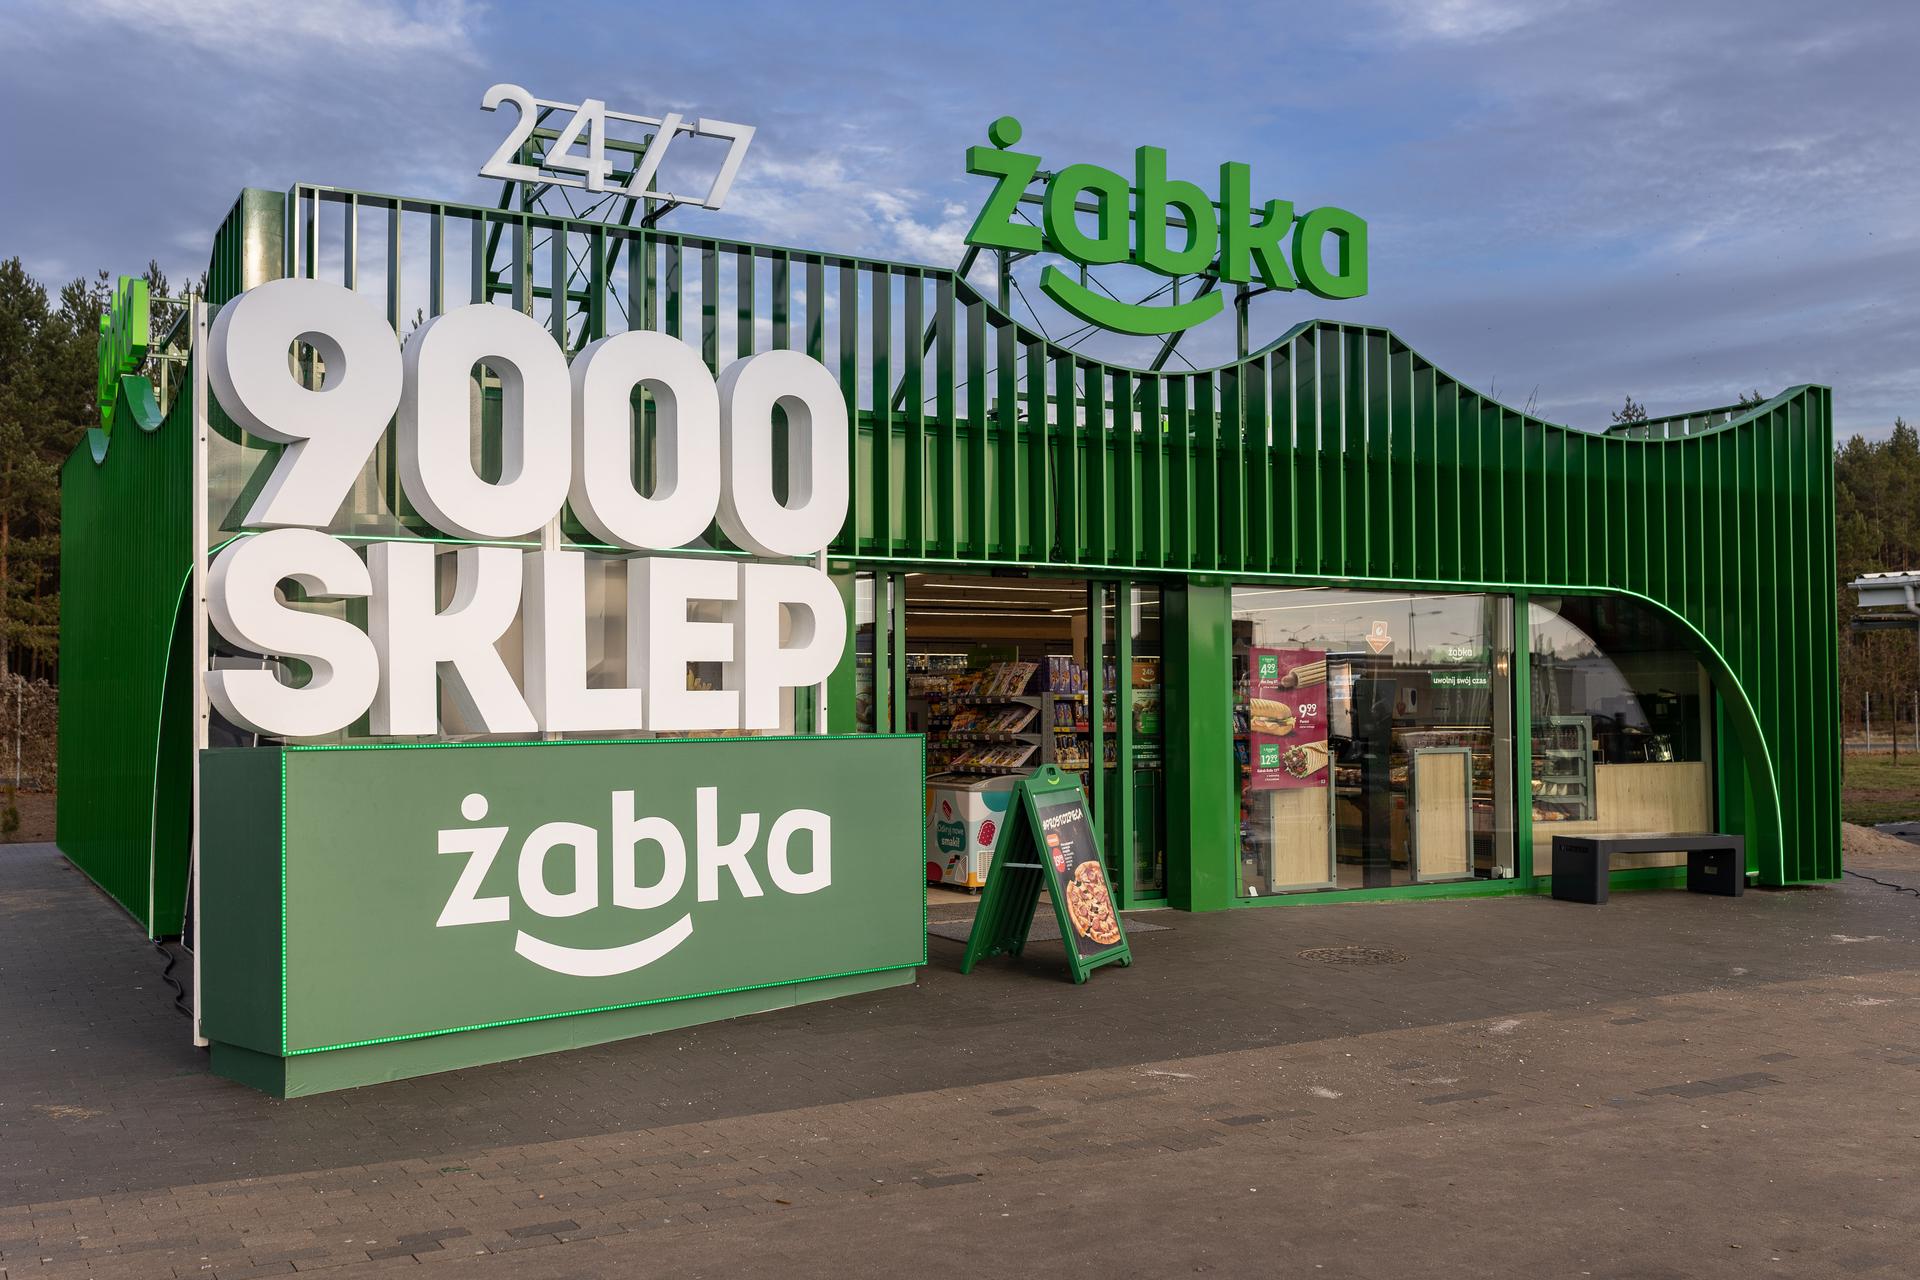 Żabka stores on May 3.  Hours May 1, 2 and 3, 2023. Frog weekend in May, are they open?